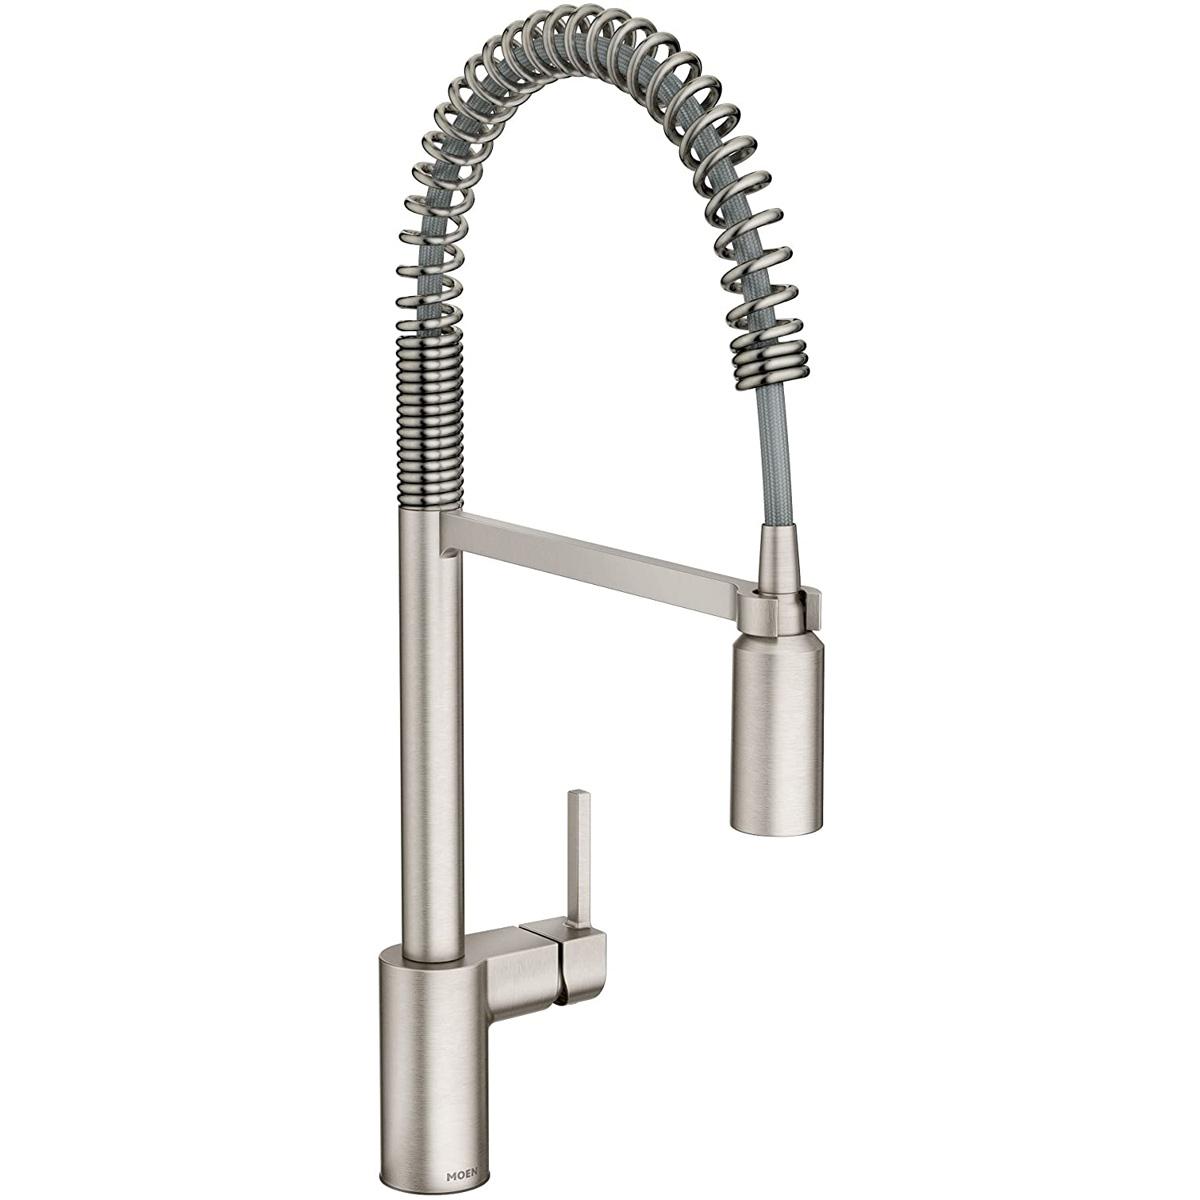 Moen Align One-Handle Pre-Rinse Spring Pulldown Kitchen Faucet for $280 Shipped